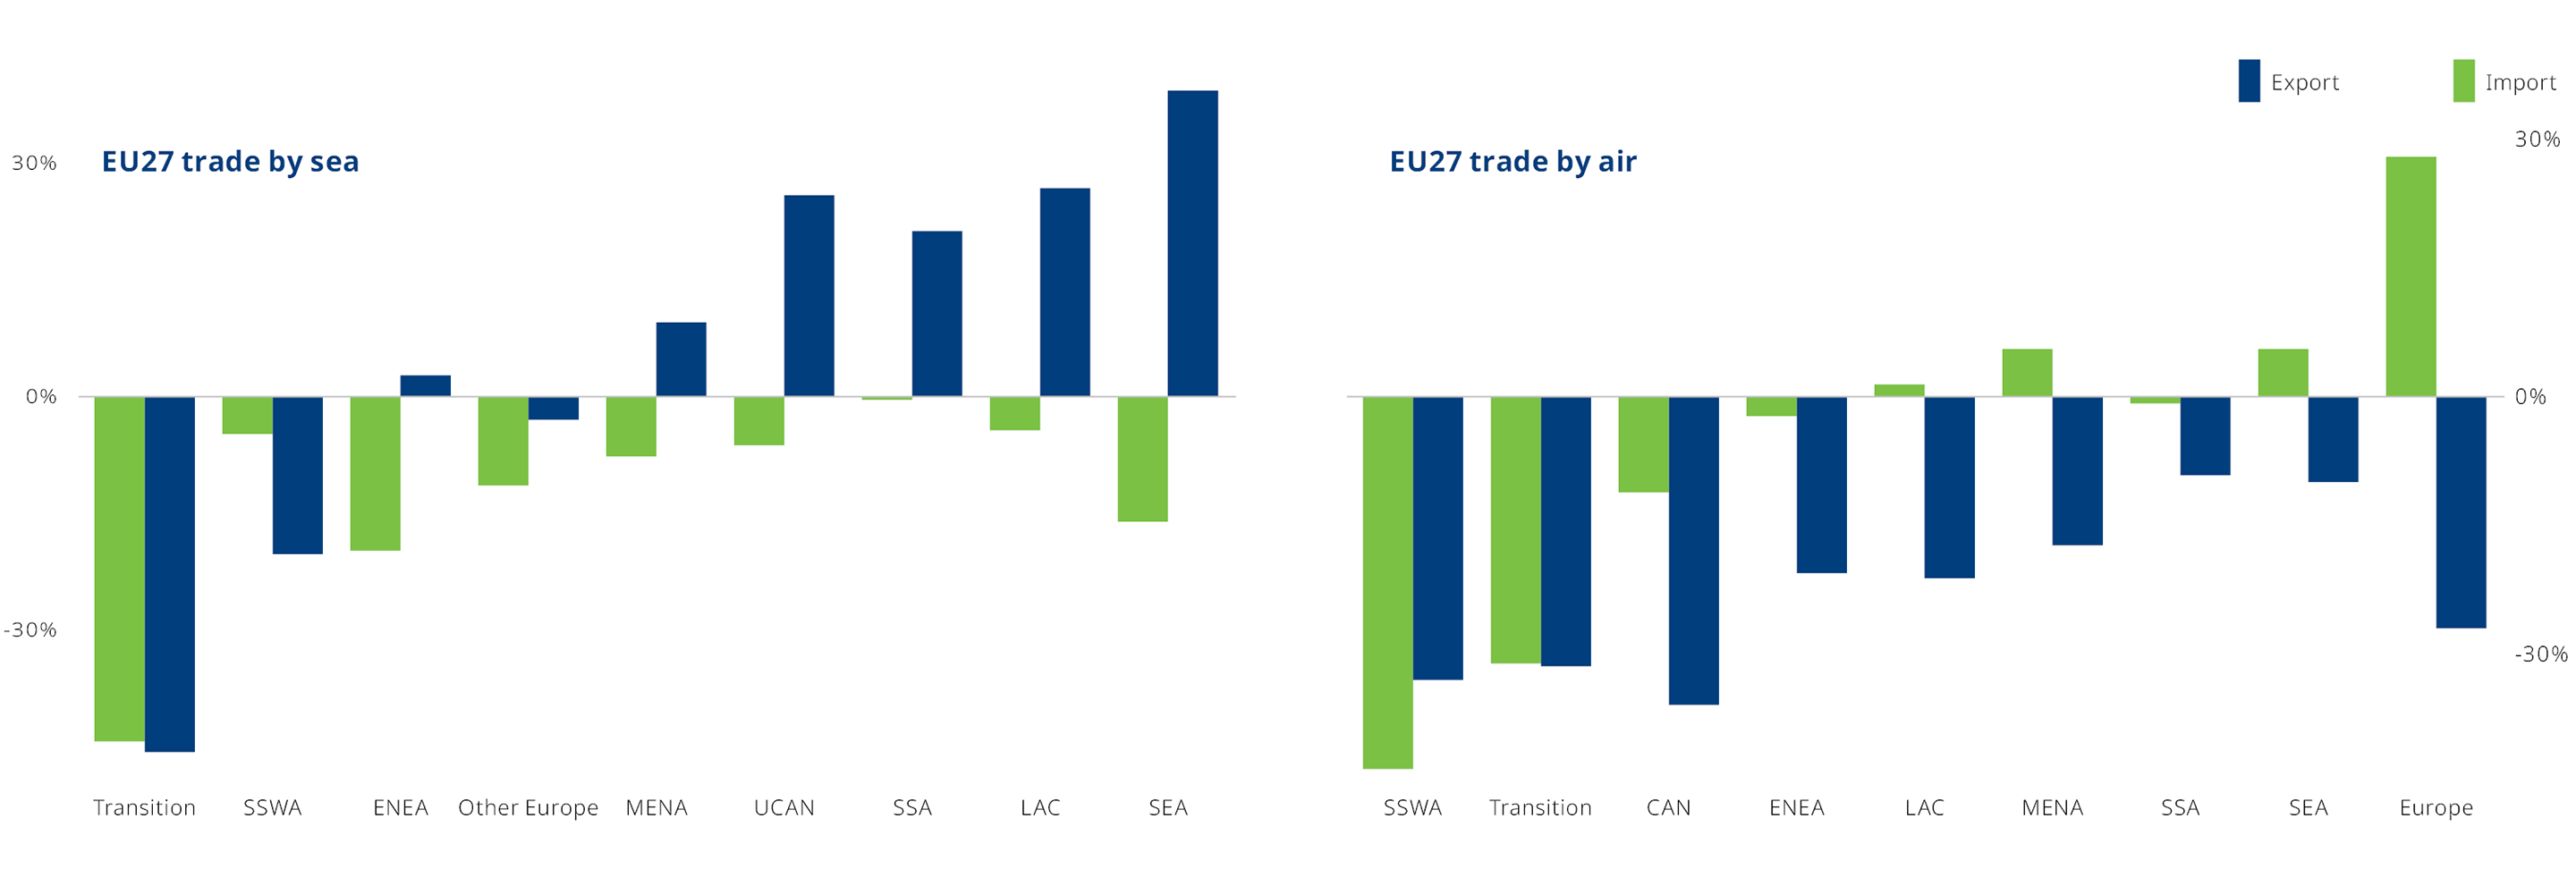 Europe’s trade with transition economies has fallen dramatically, with exports to Southeast Asia surging